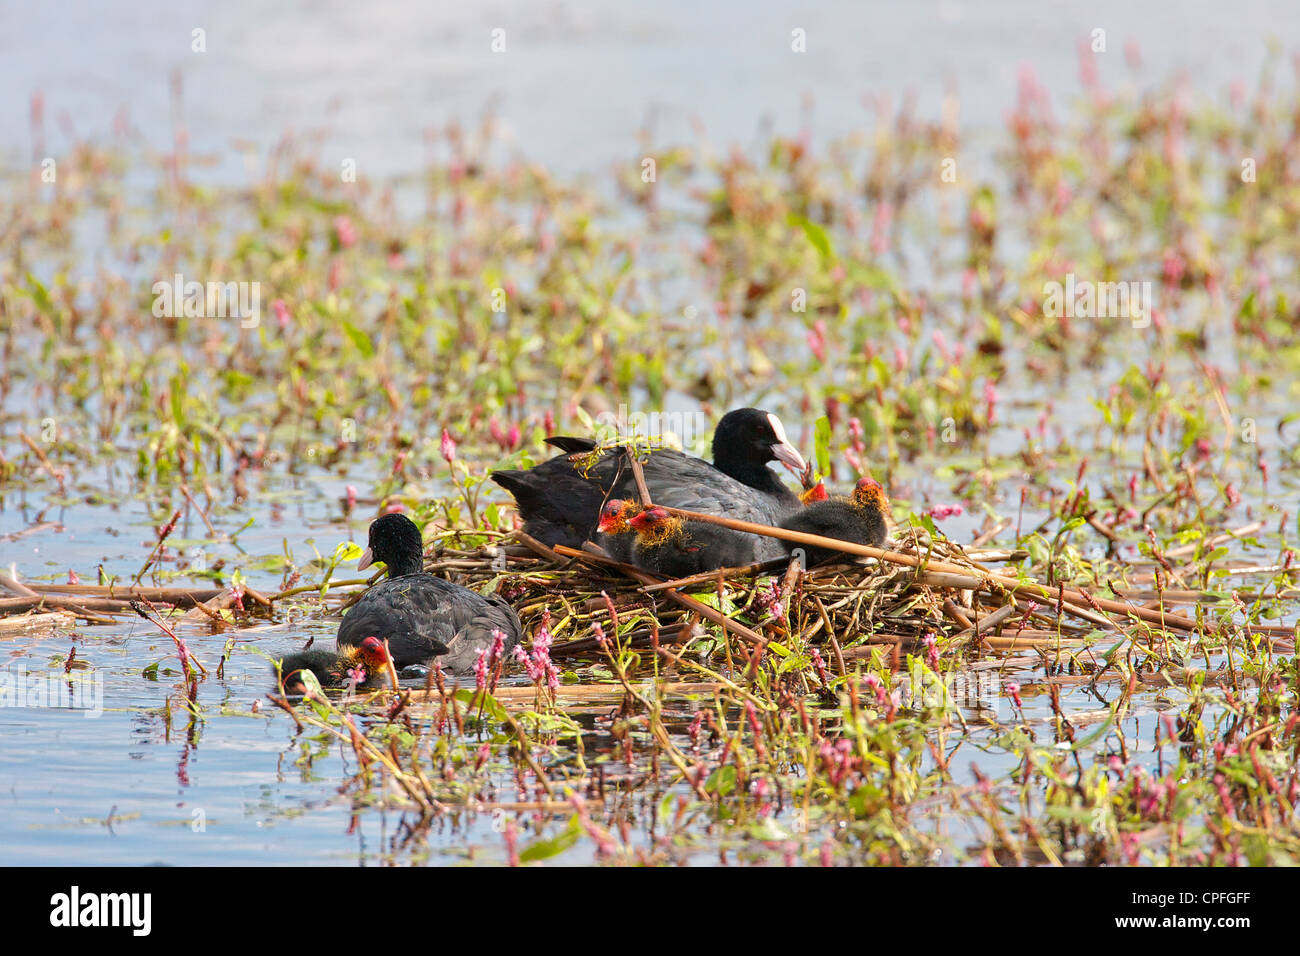 Female Coot (Fulica atra) With five chicks on safely built nest, the male leaving having just delivered food. Stock Photo